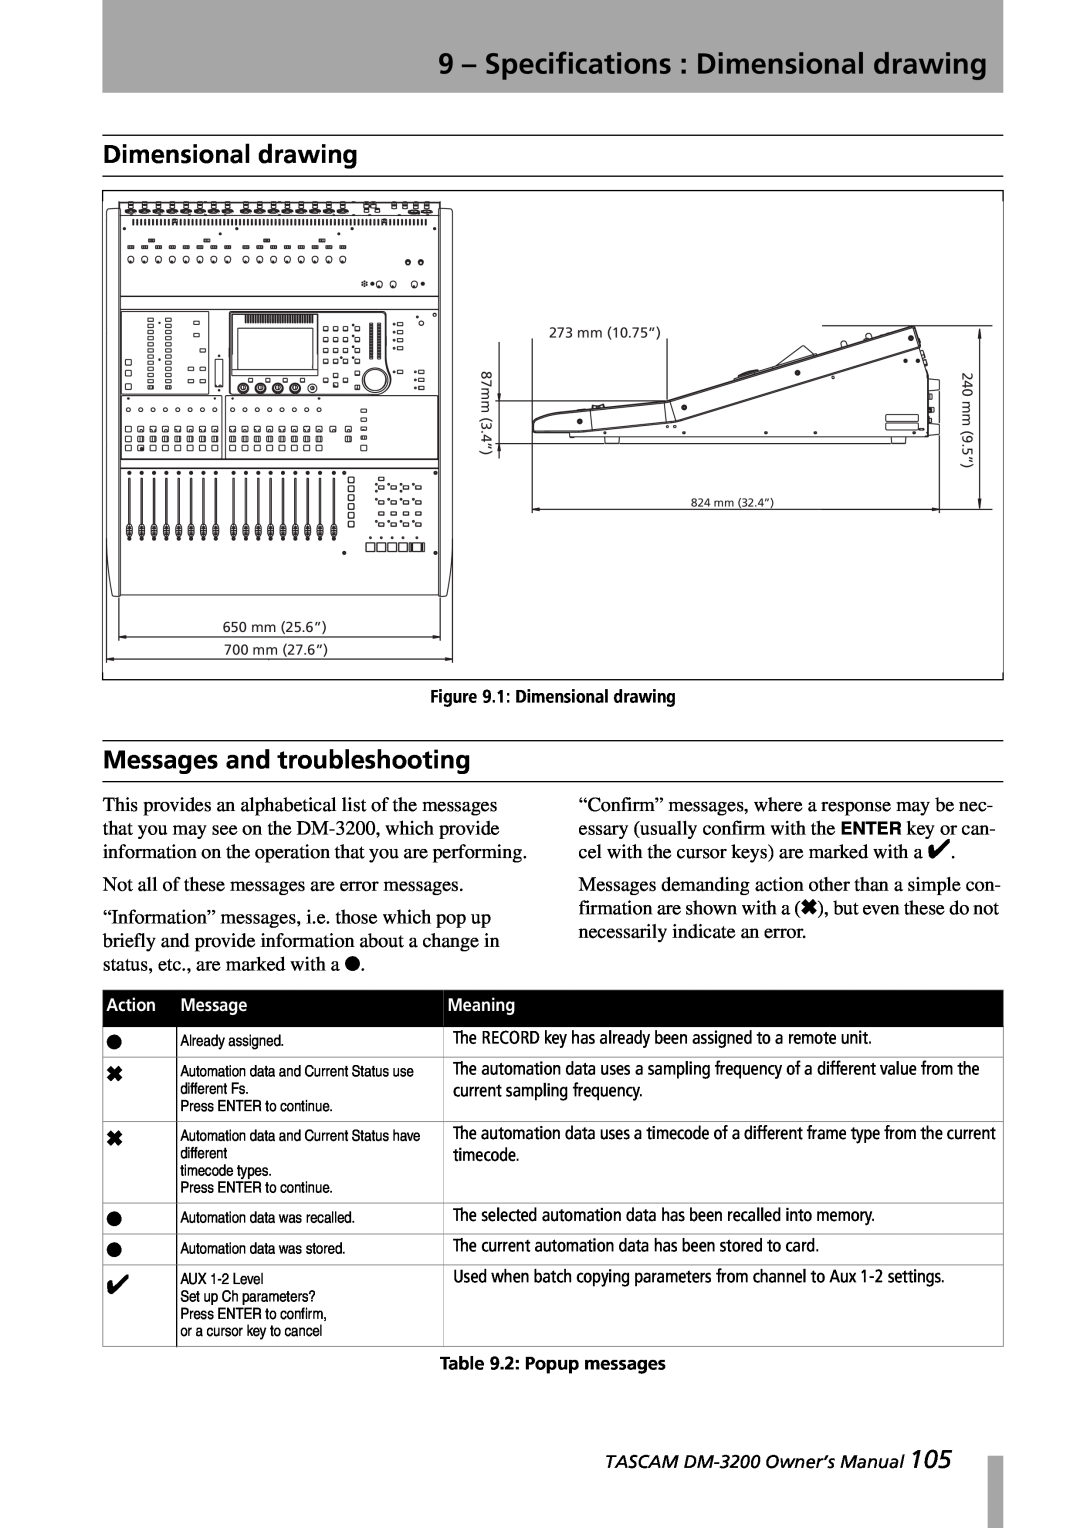 Tascam DM-3200 owner manual 9 – Specifications : Dimensional drawing, Messages and troubleshooting 